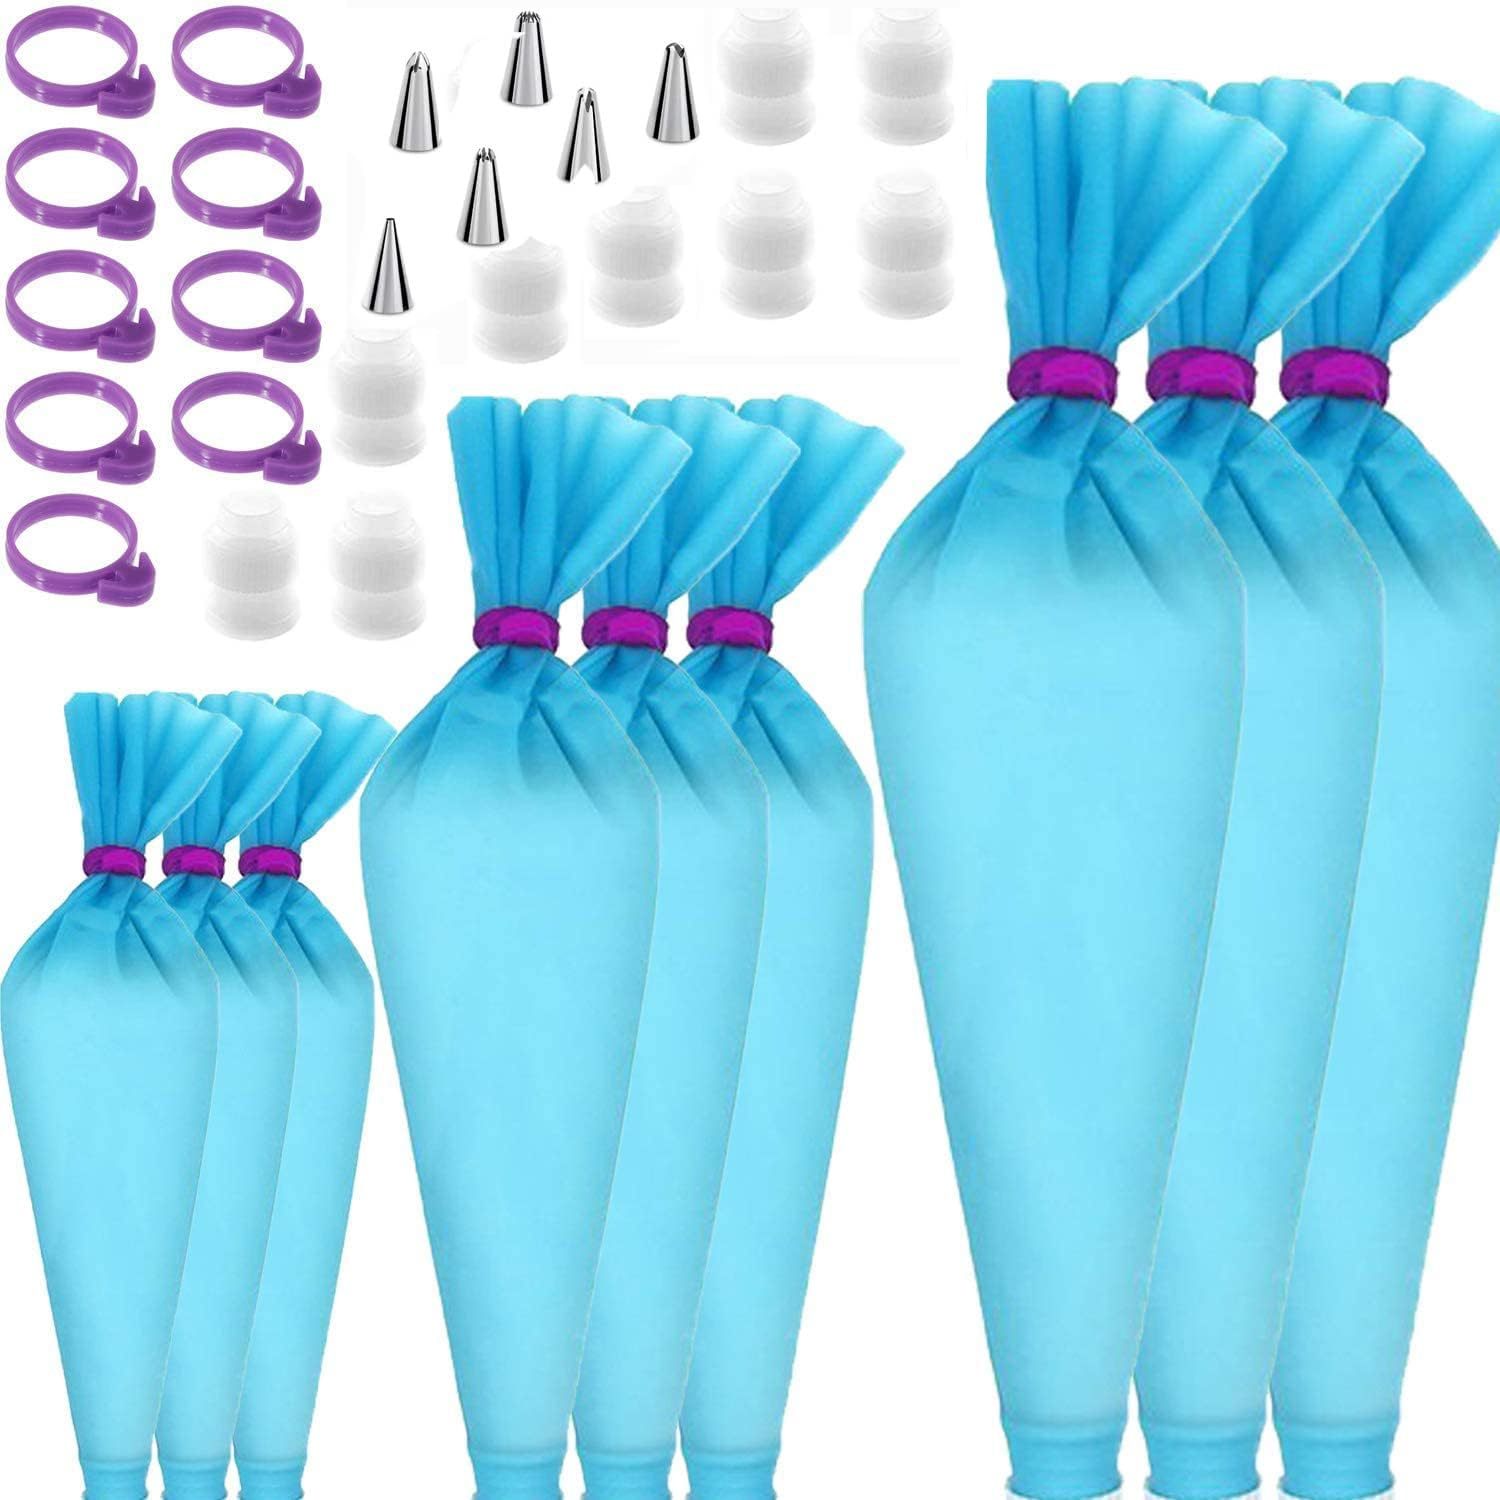 

33 Pcs Reusable Piping Bags And Tips Set - Silicone Icing Bags With Tips - Cake Decorating Kit Of 9 Pastry Bags 12, 14 & 16 Inch - 9 Couplers, 9 Bag Ties, 6 Frosting Tips